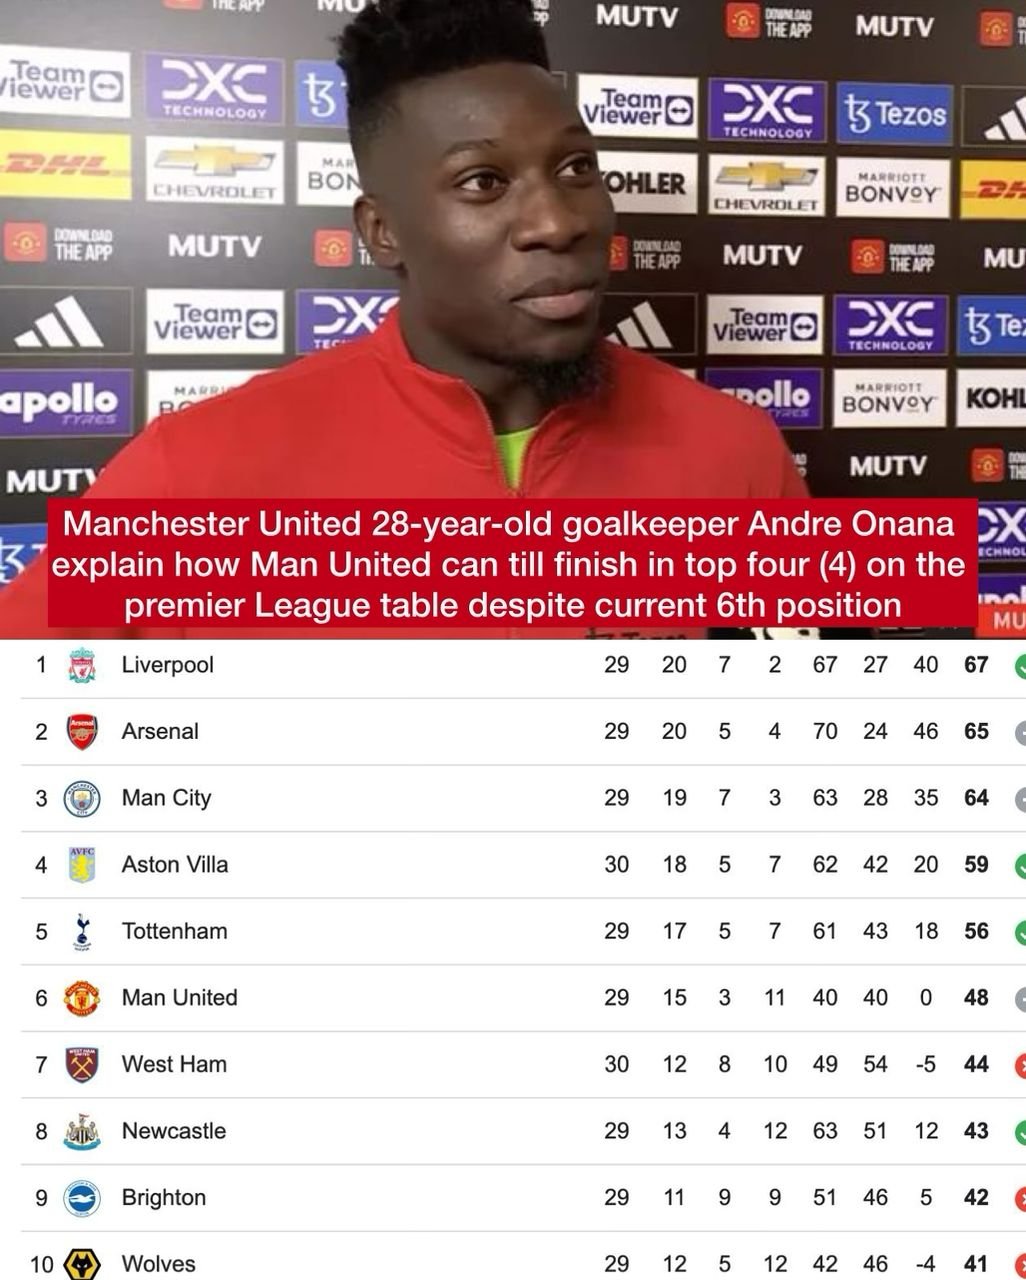 Manchester United 28-year-old goalkeeper Andre Onana explain how Man United can till finish in top four (4) on the premier League table despite current 6th position